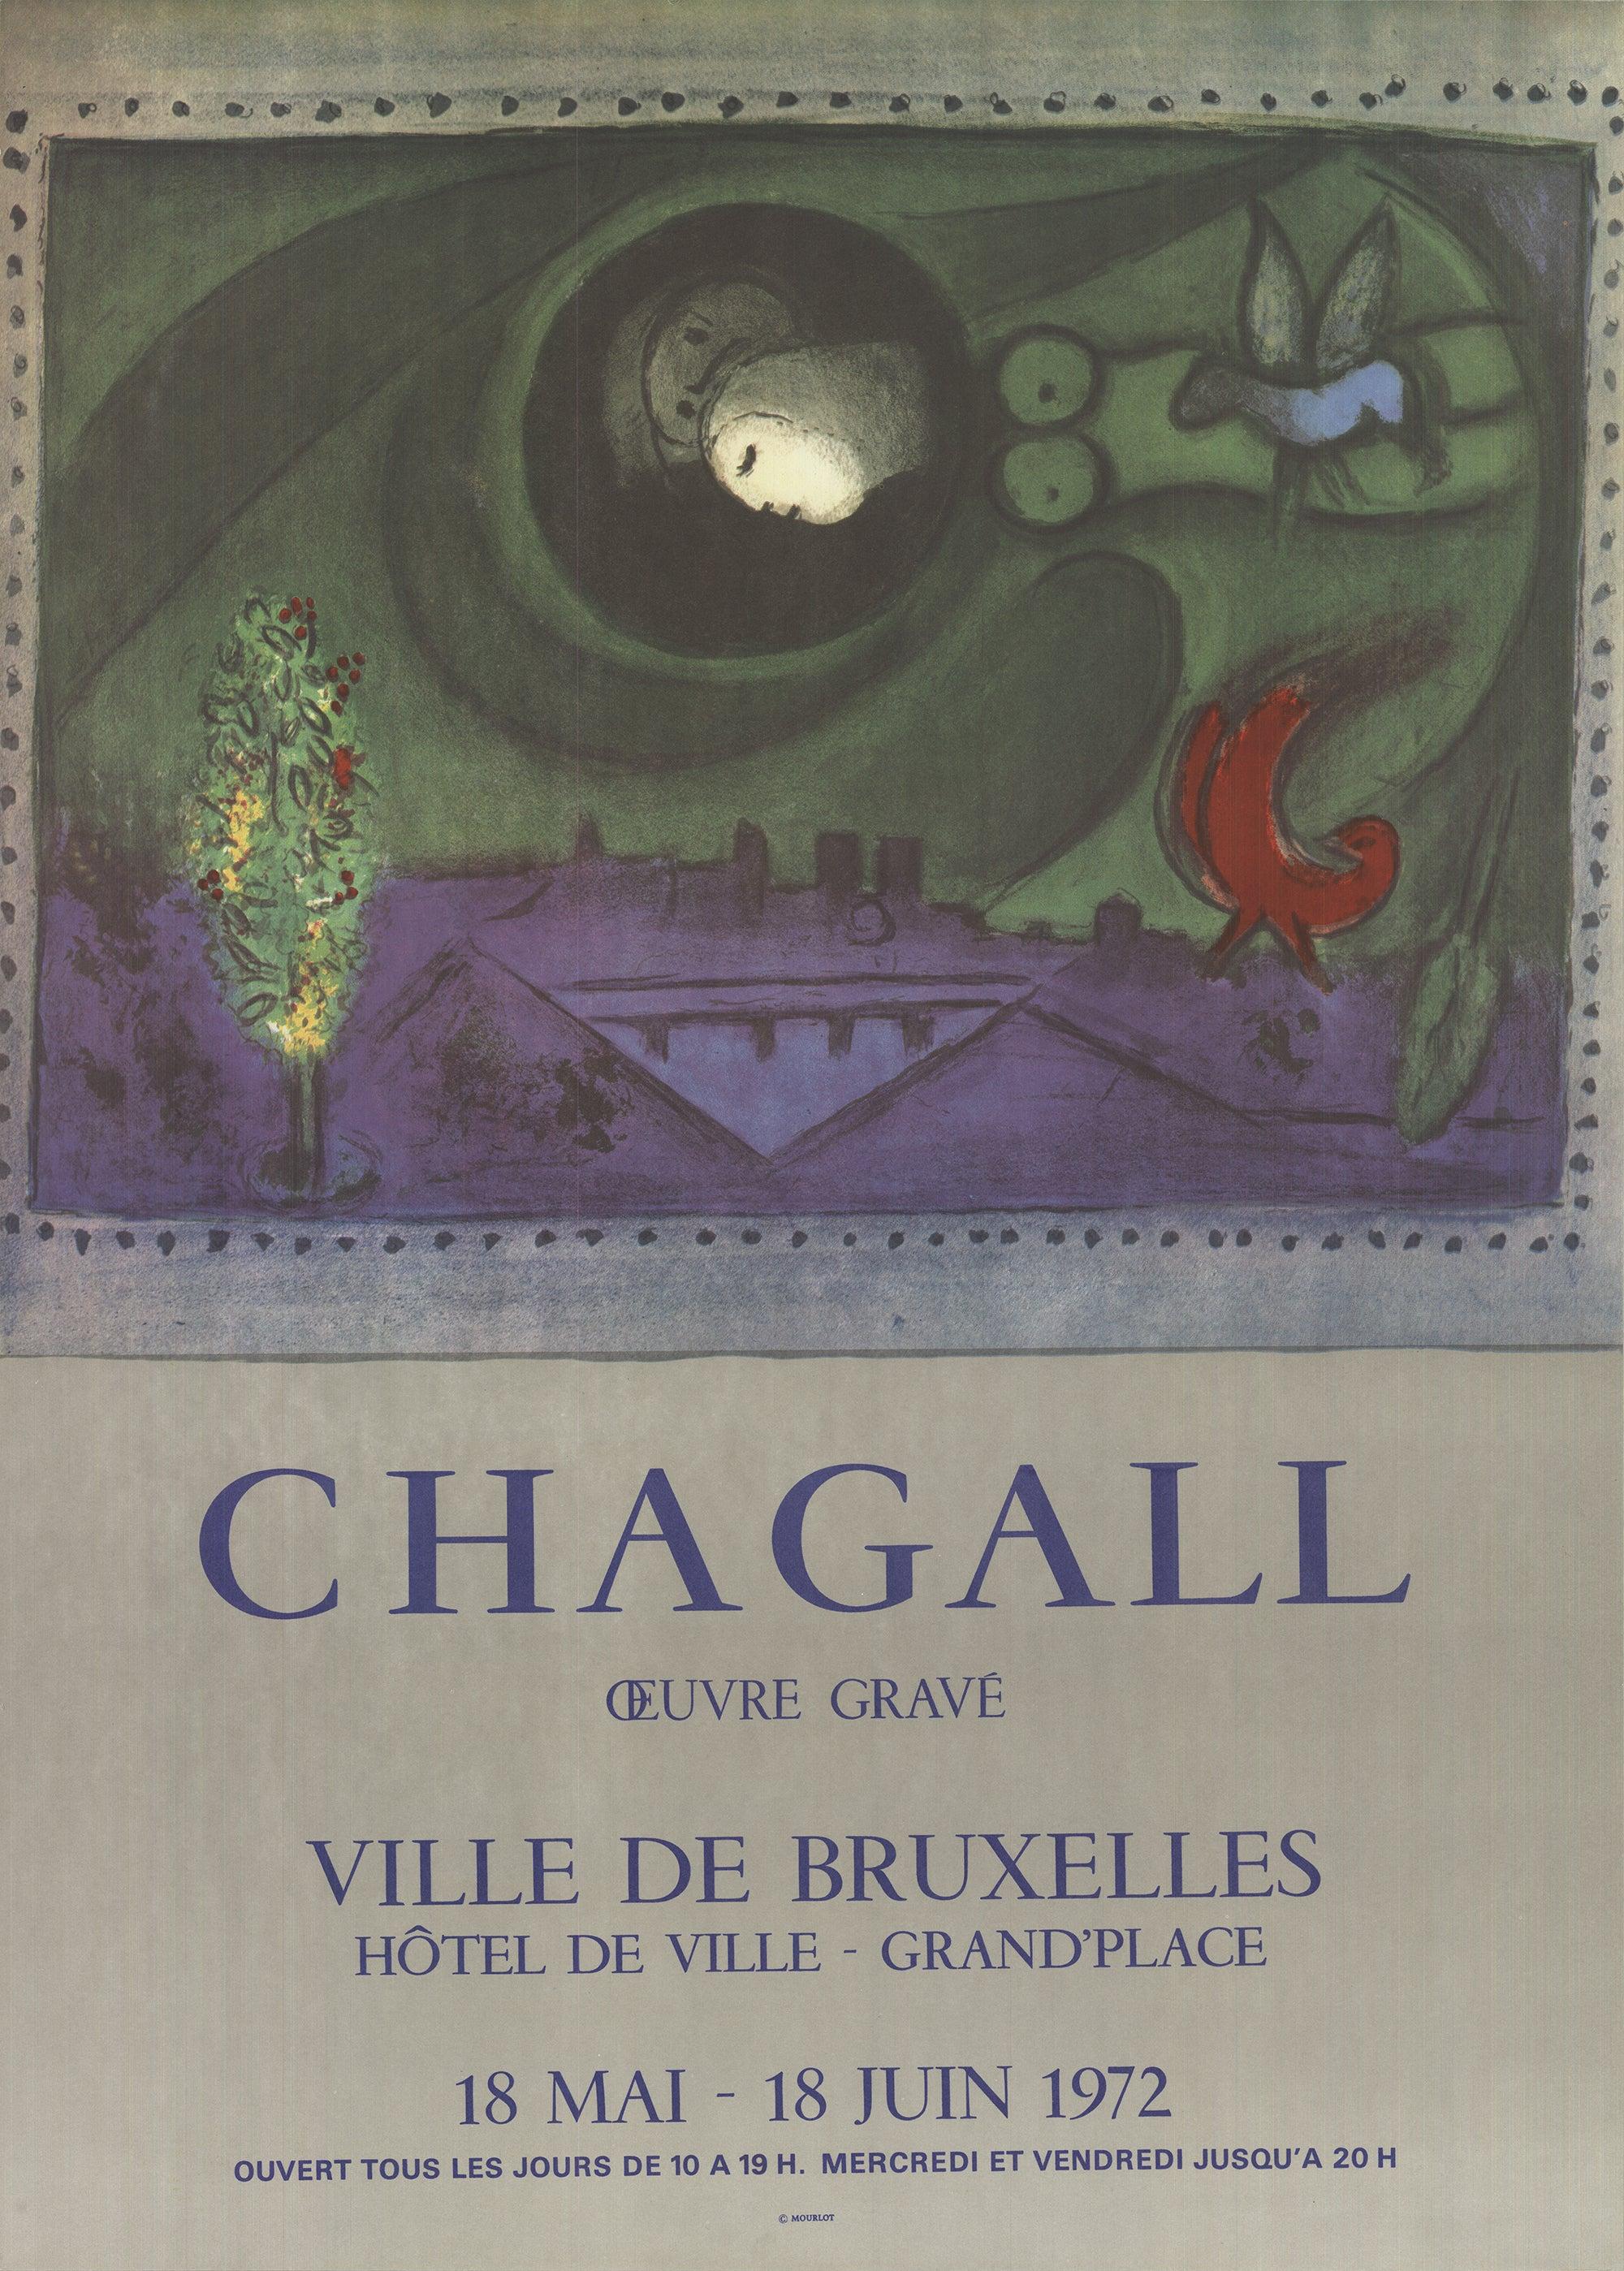 Paper Size: 28.5 x 20.5 inches ( 72.39 x 52.07 cm )
Image Size: 17 x 20.5 inches ( 43.18 x 52.07 cm )
Framed: No
Condition: A: Mint
Additional Details: Exhibition poster created by Chagall for an exhibtion held In Brussels, Belgium in 1972. Edition